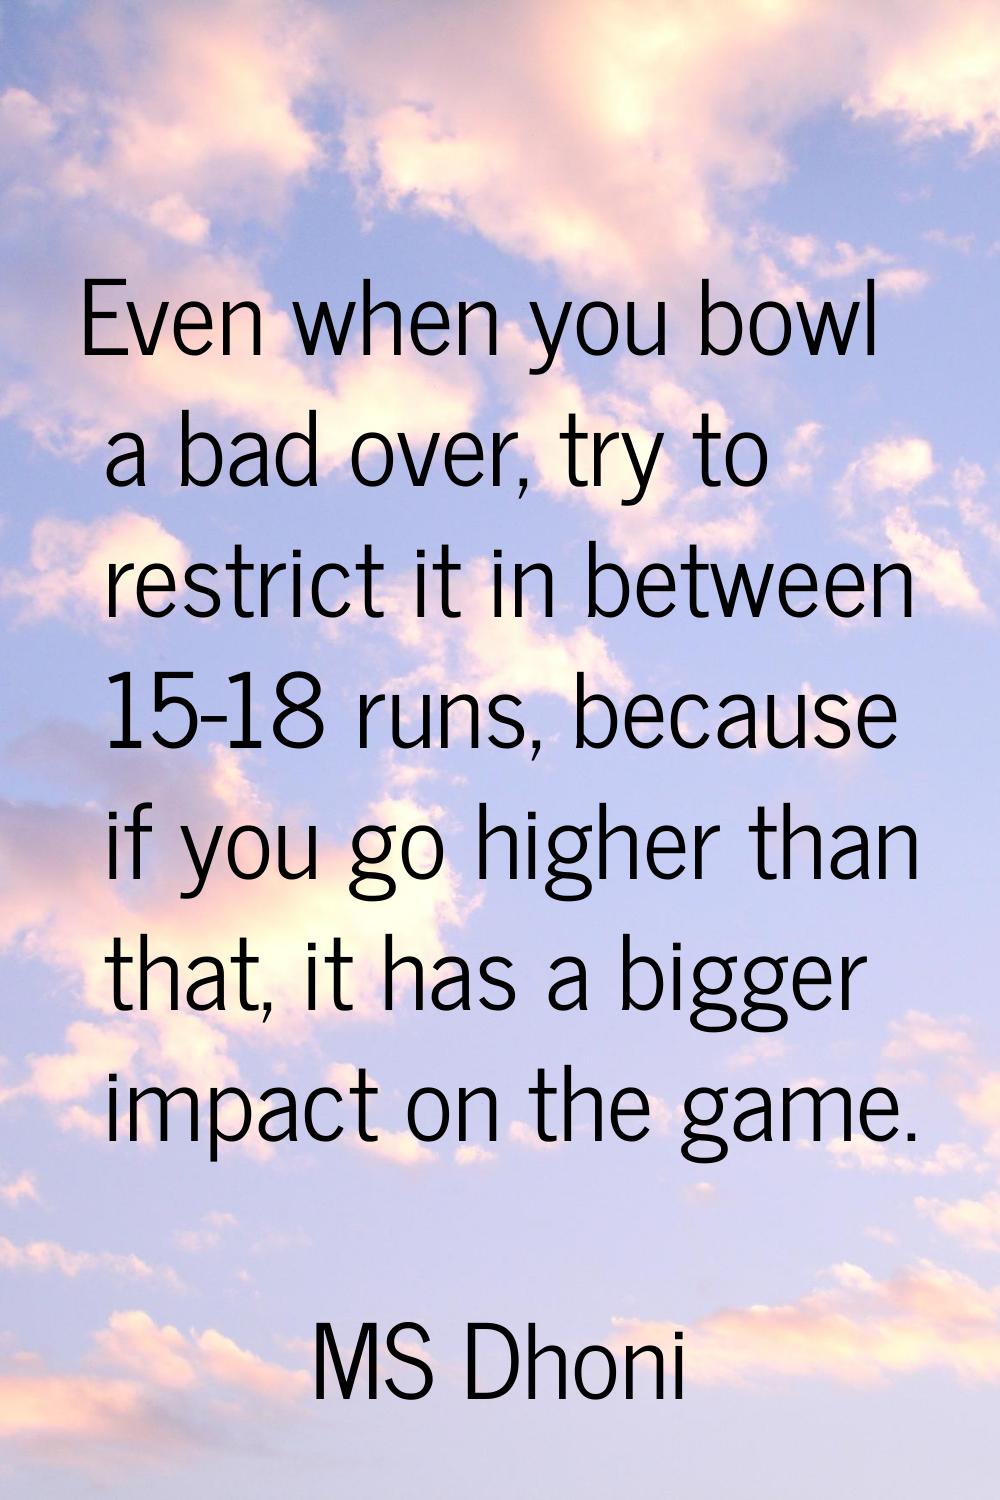 Even when you bowl a bad over, try to restrict it in between 15-18 runs, because if you go higher t